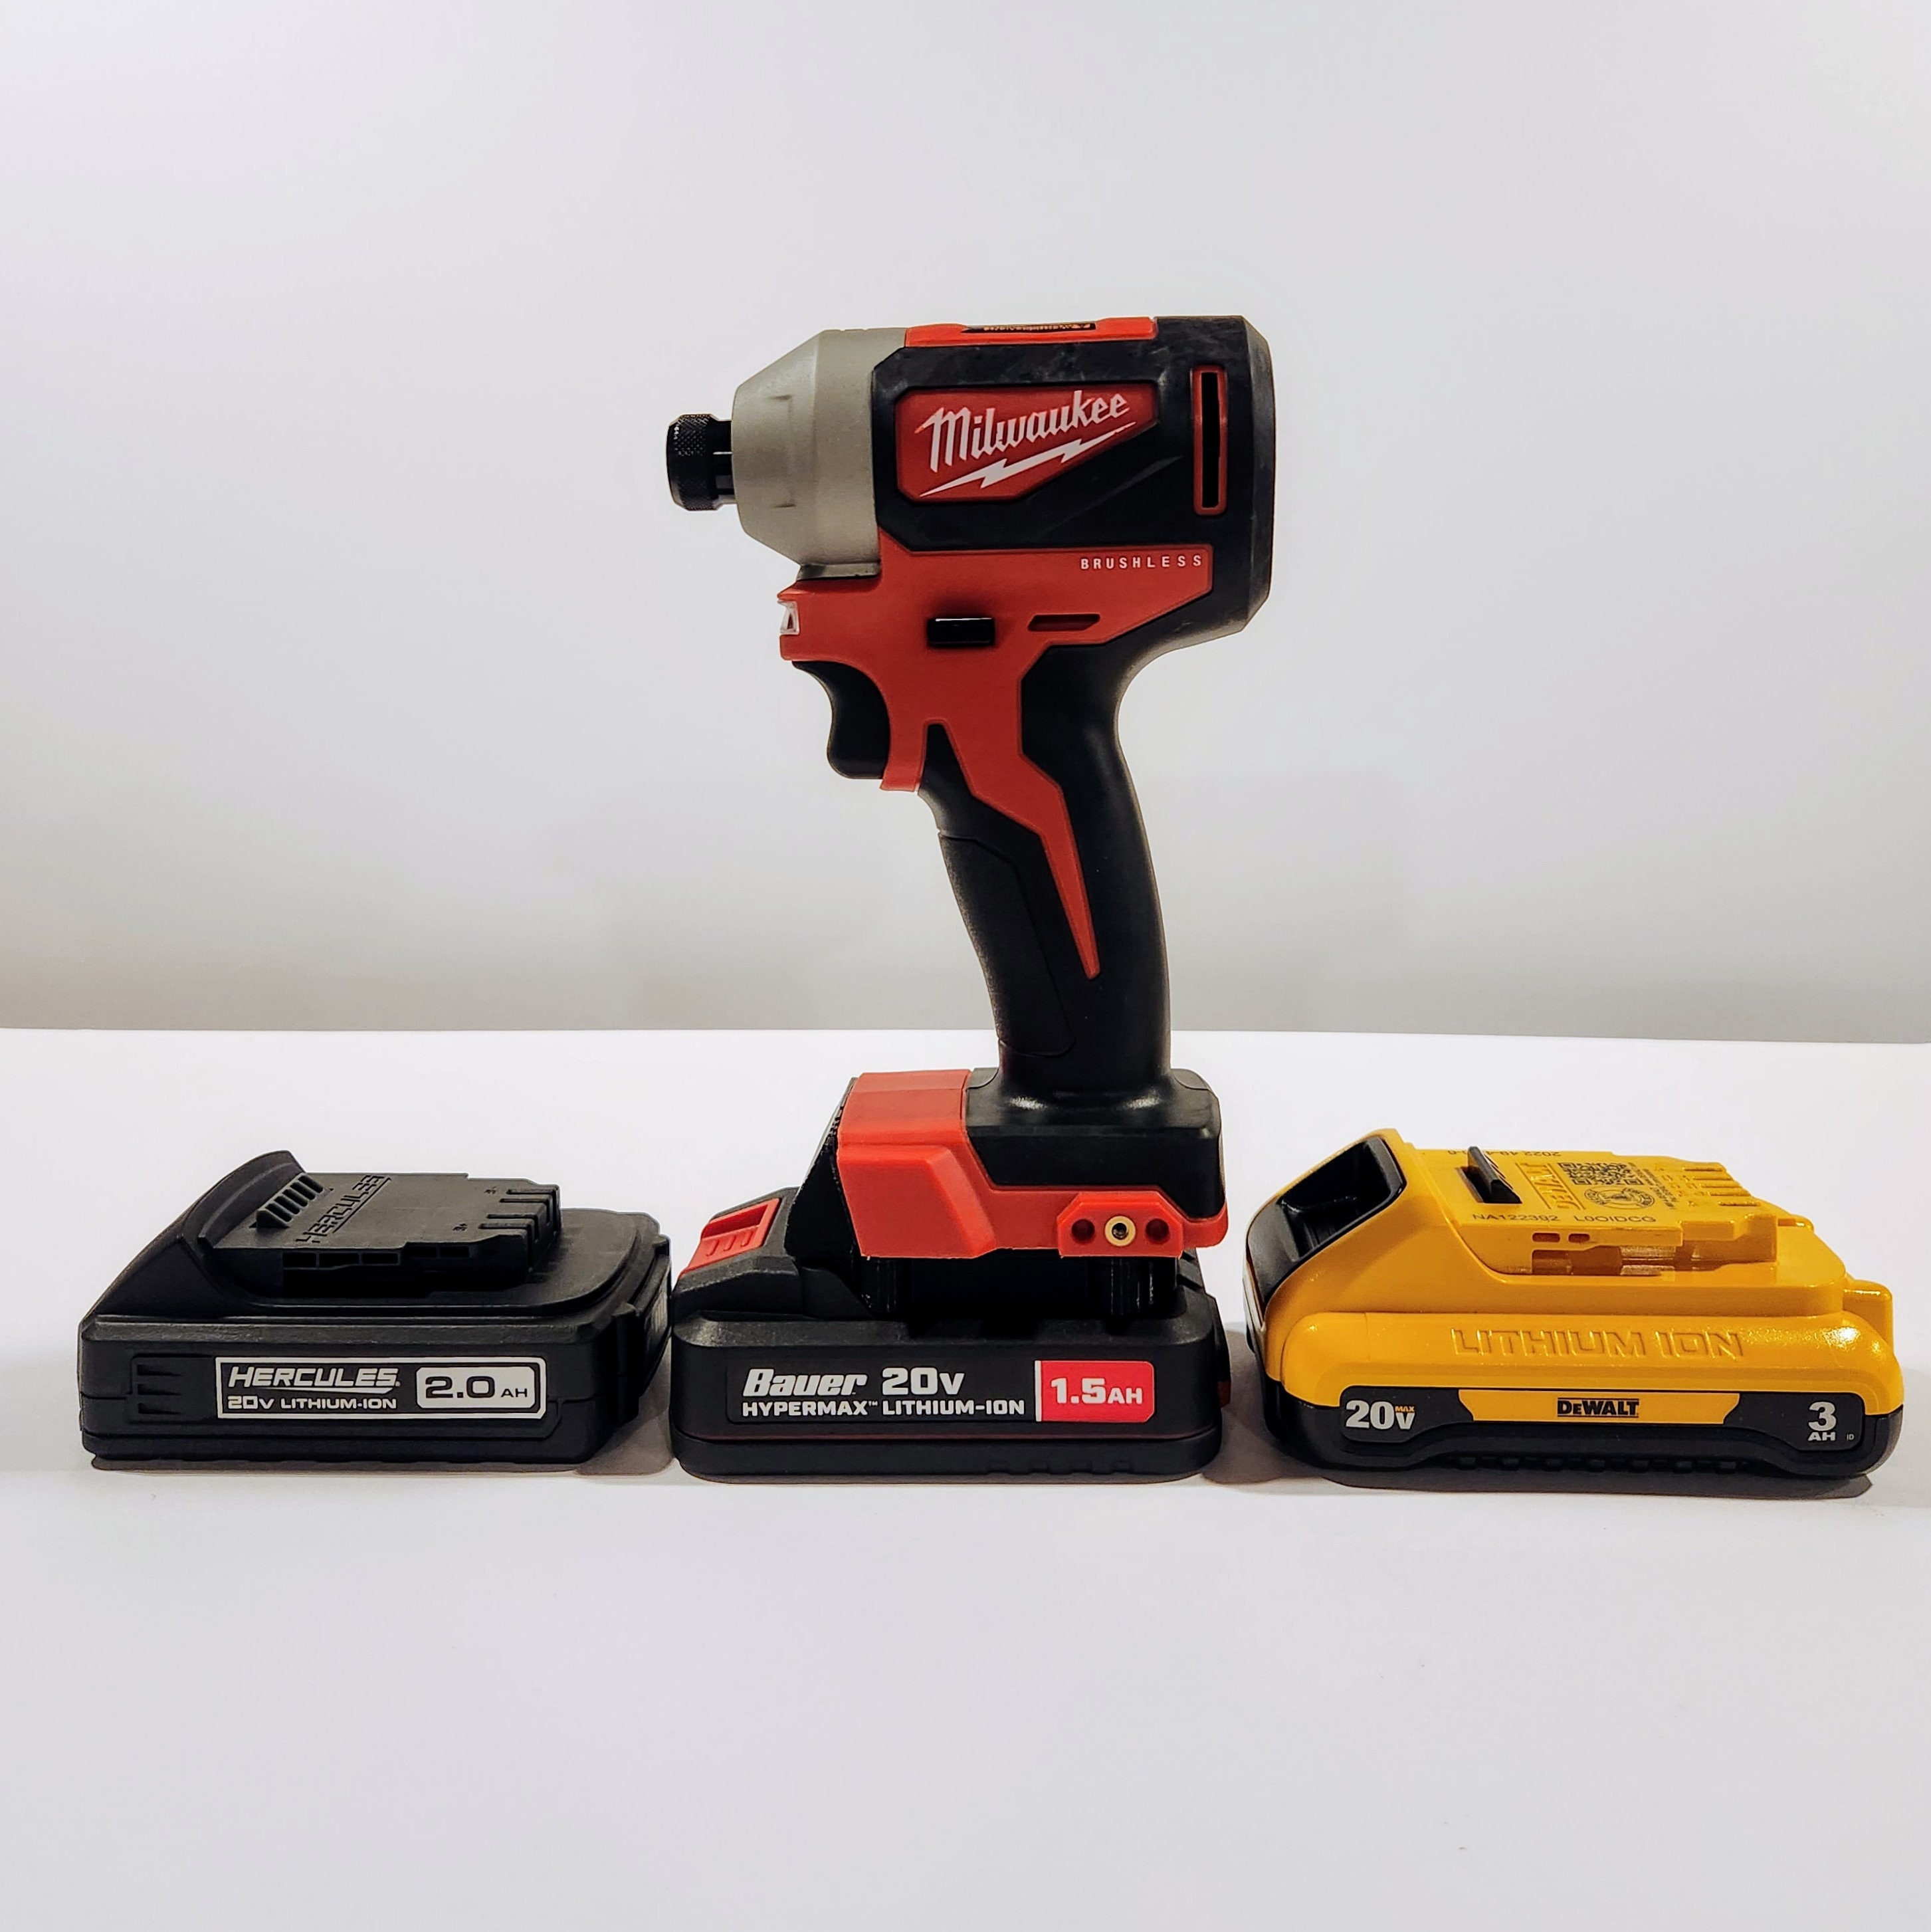 Honest Review Of The Harbor Freight Bauer Cordless Heat Gun / Is It Worth  It? 